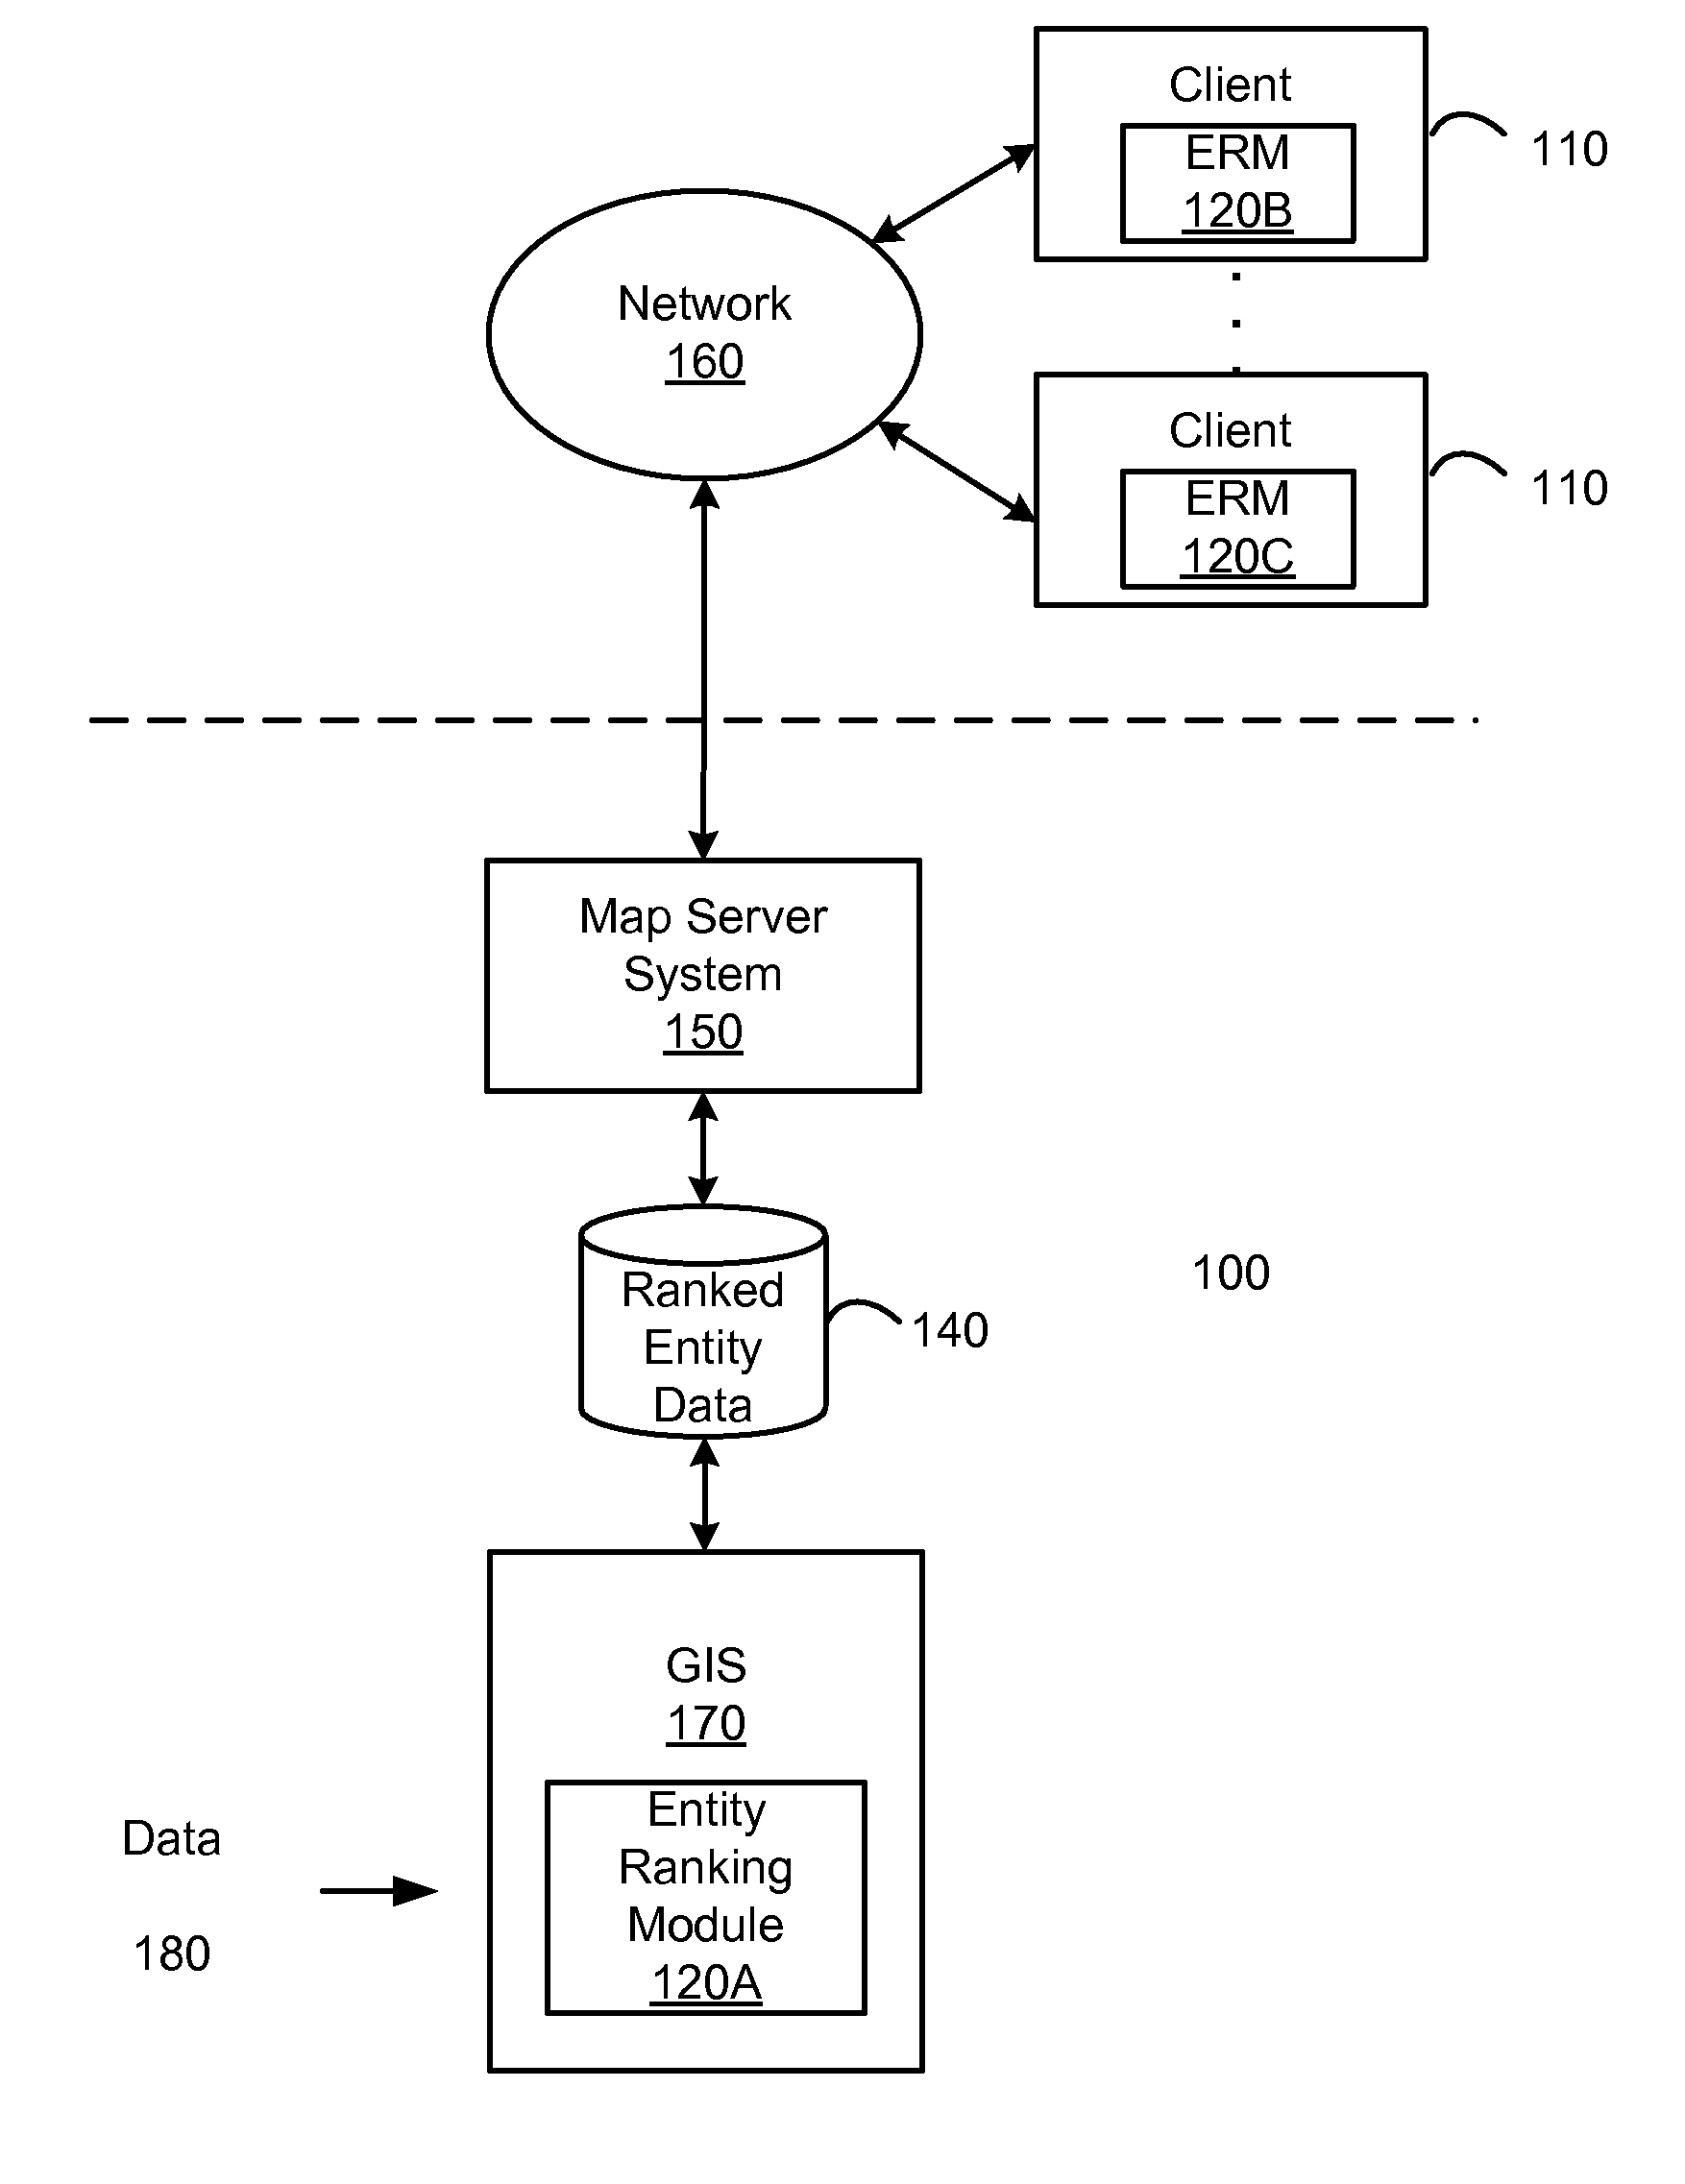 Entity display priority in a distributed geographic information system